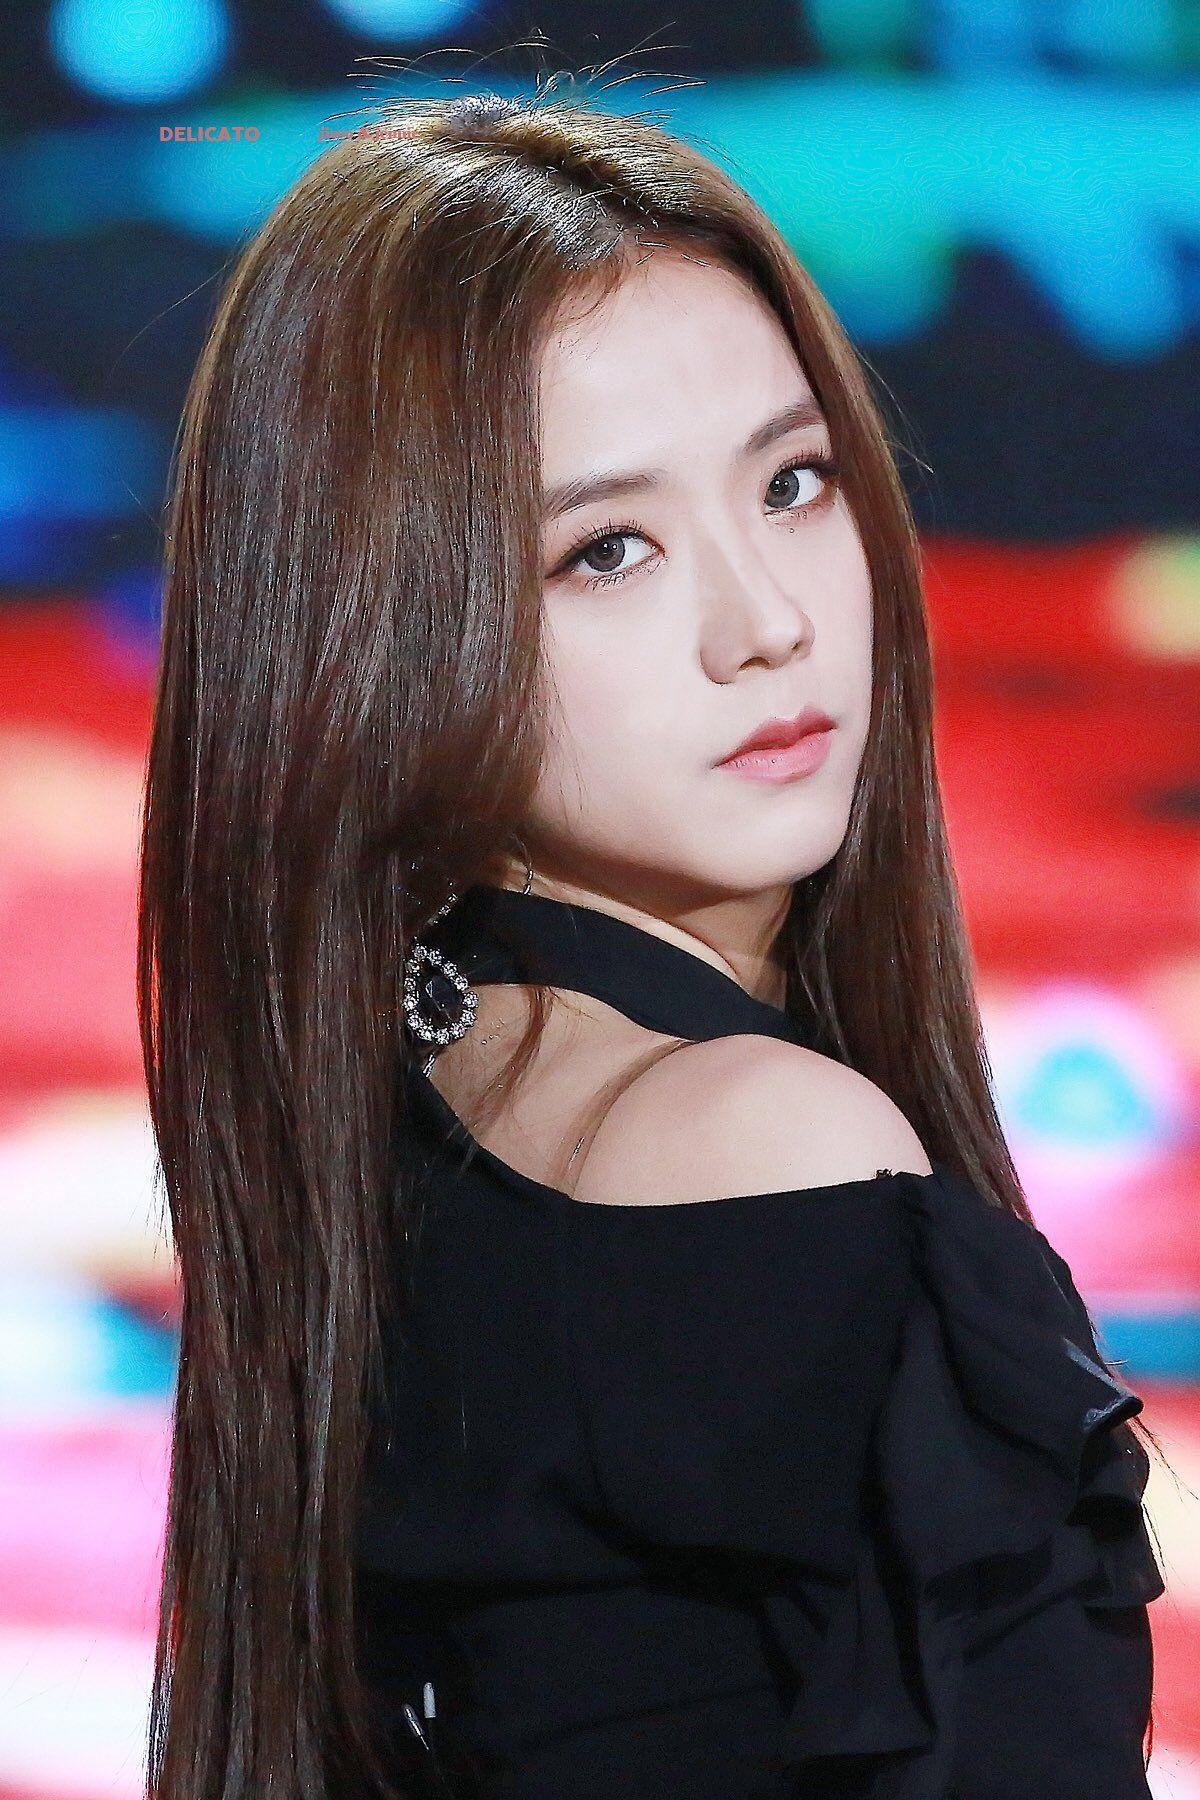 75+ Hot Pictures Of Jisoo Which Will Make You Fantasize Her | Best Of Comic Books